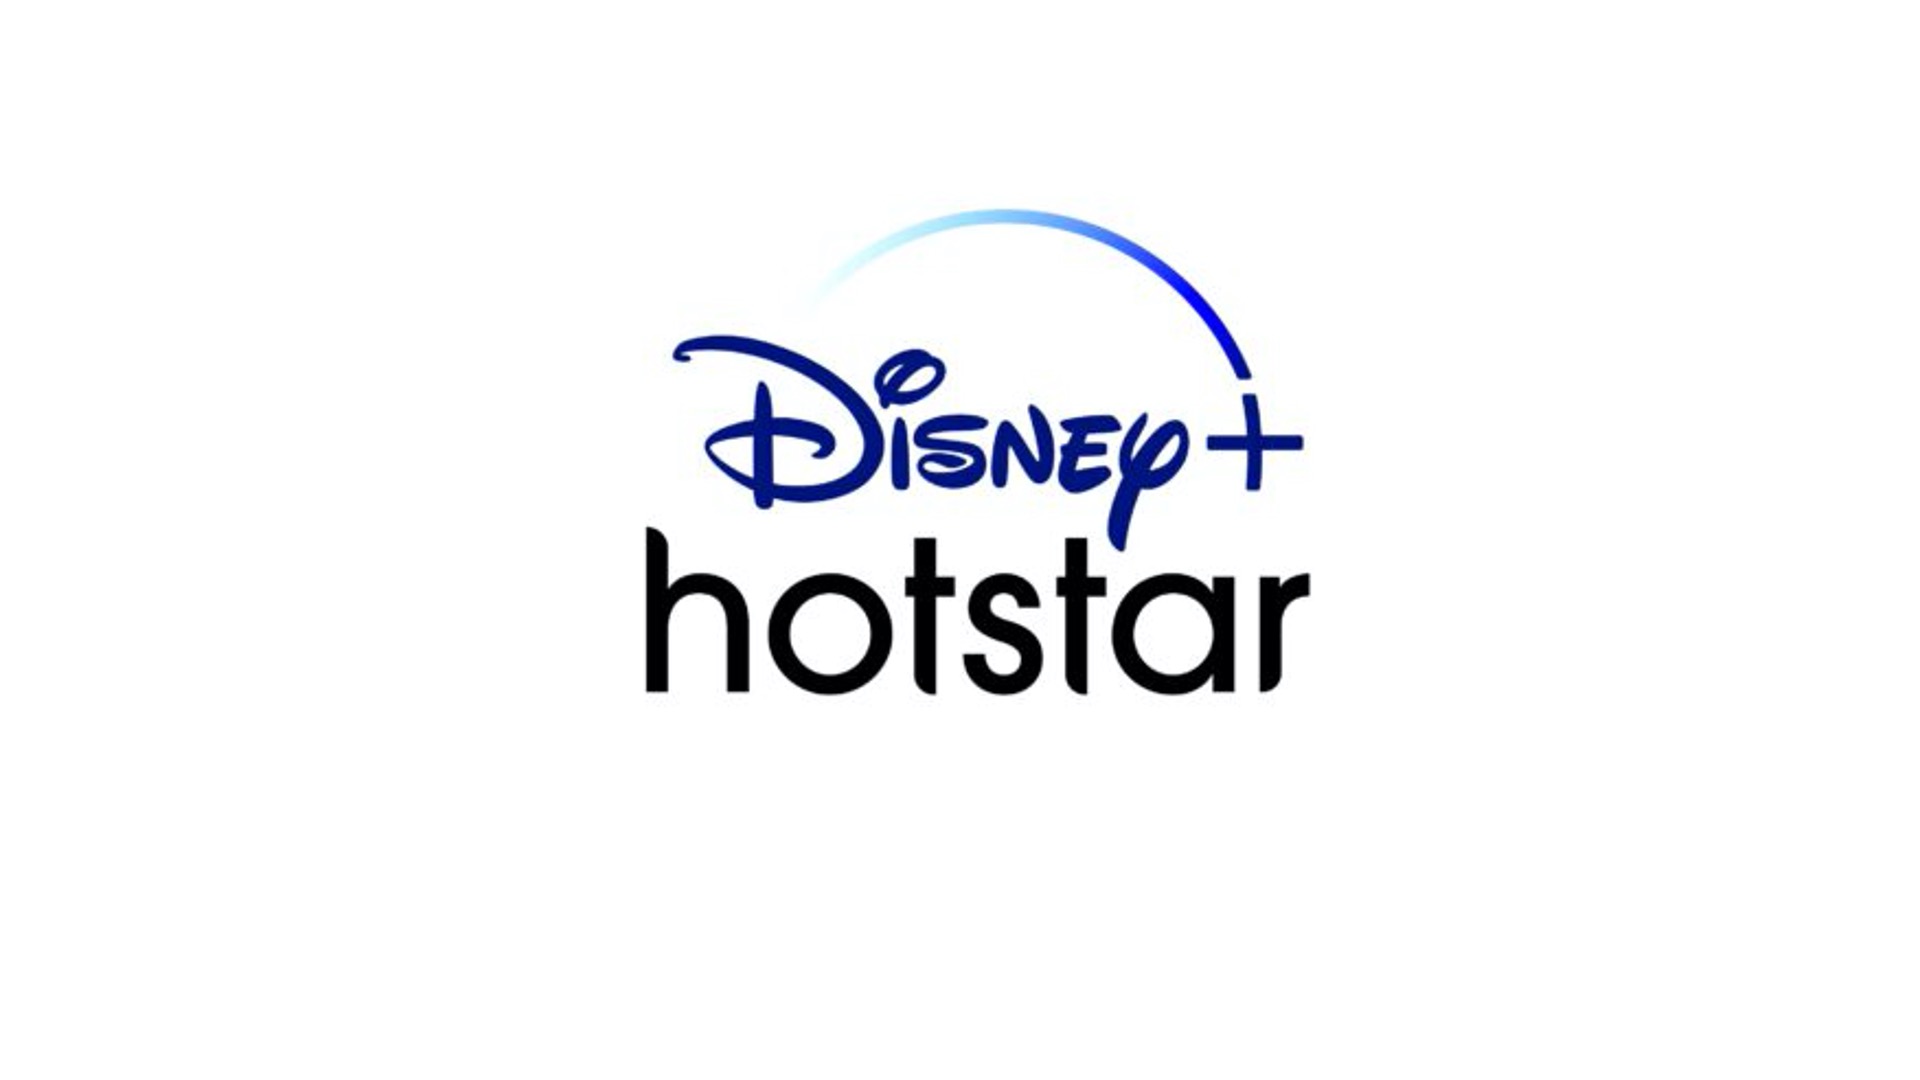 Disney Plus Hotstar now official in India with new subscription plans